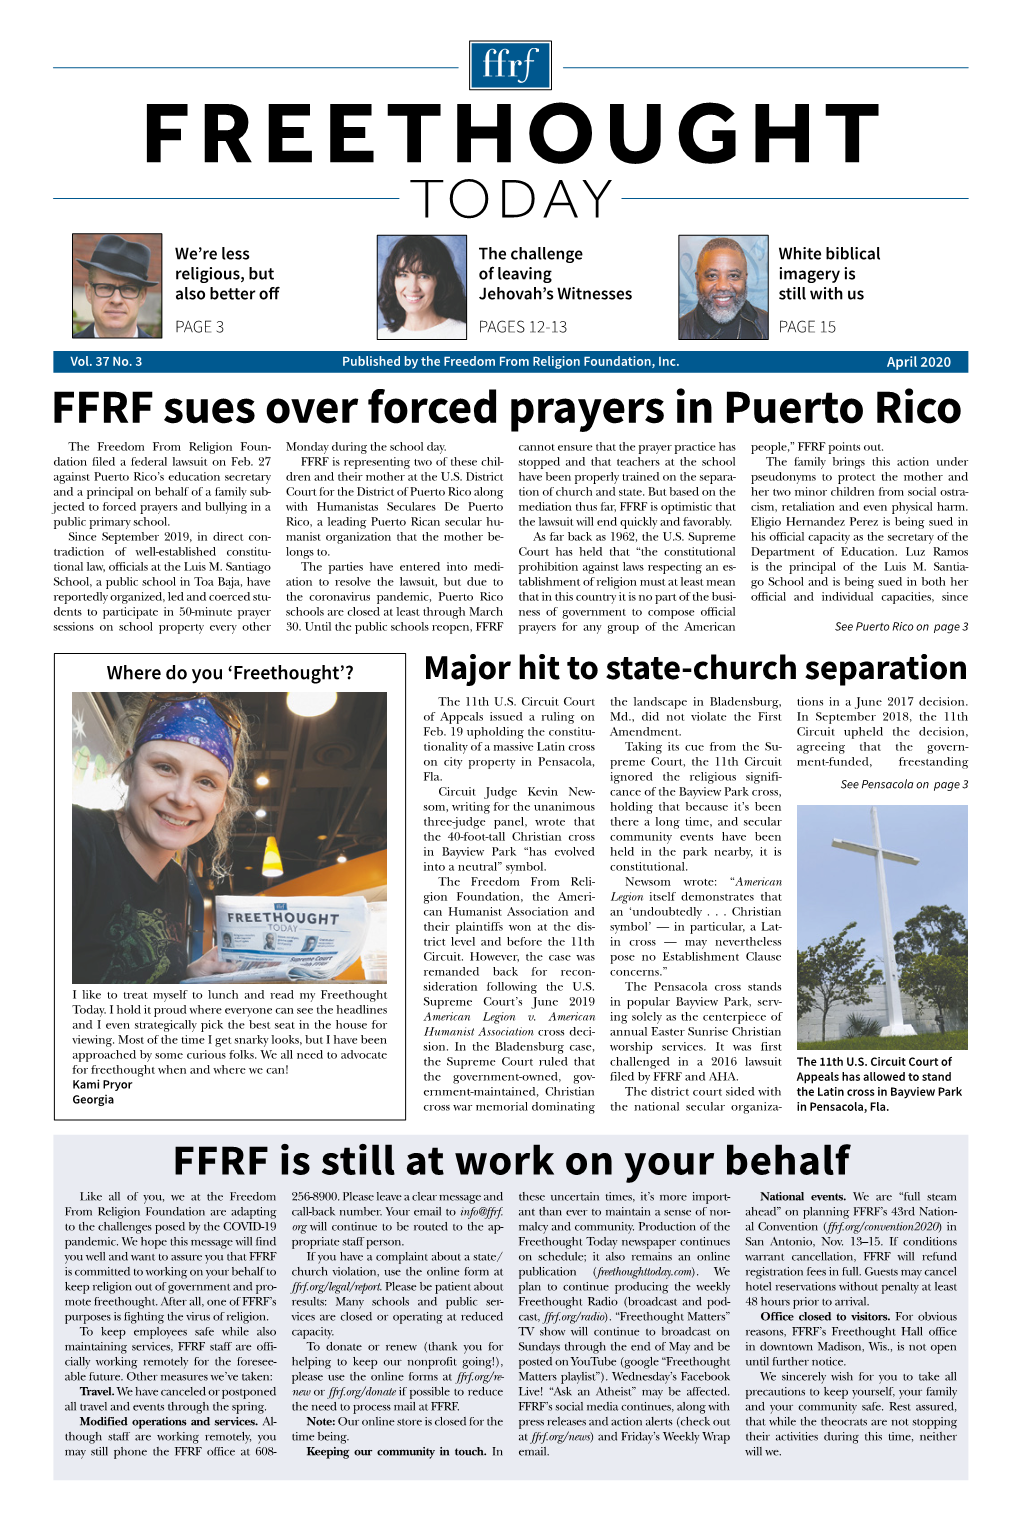 FFRF Sues Over Forced Prayers in Puerto Rico the Freedom from Religion Foun- Monday During the School Day